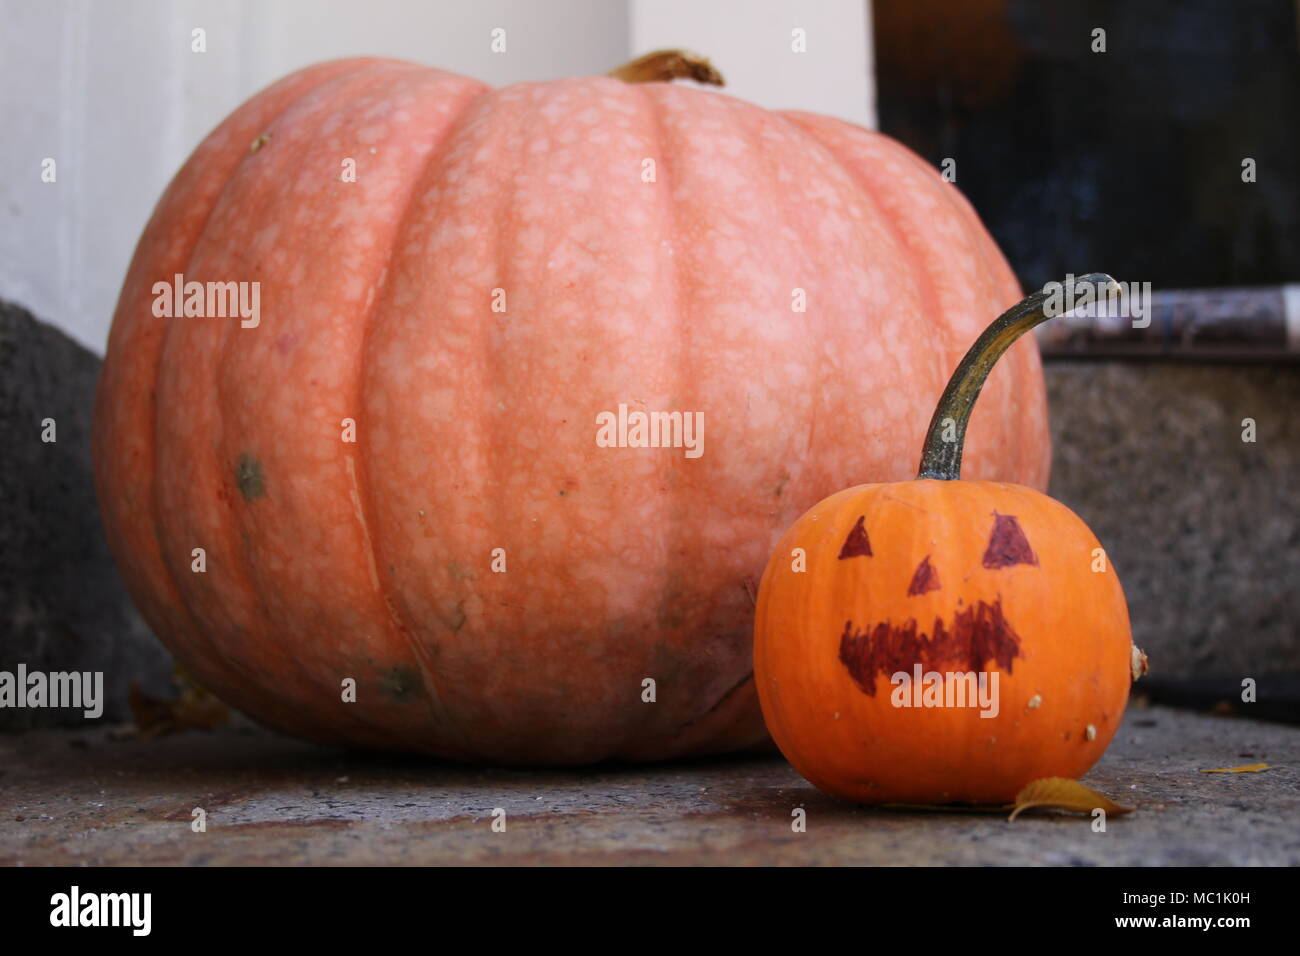 A perfect large light orange pumpkin on a doorstep with a small pumpkin with a face drawn on it with sharpie seen on Beacon Street, Boston, in October. Stock Photo